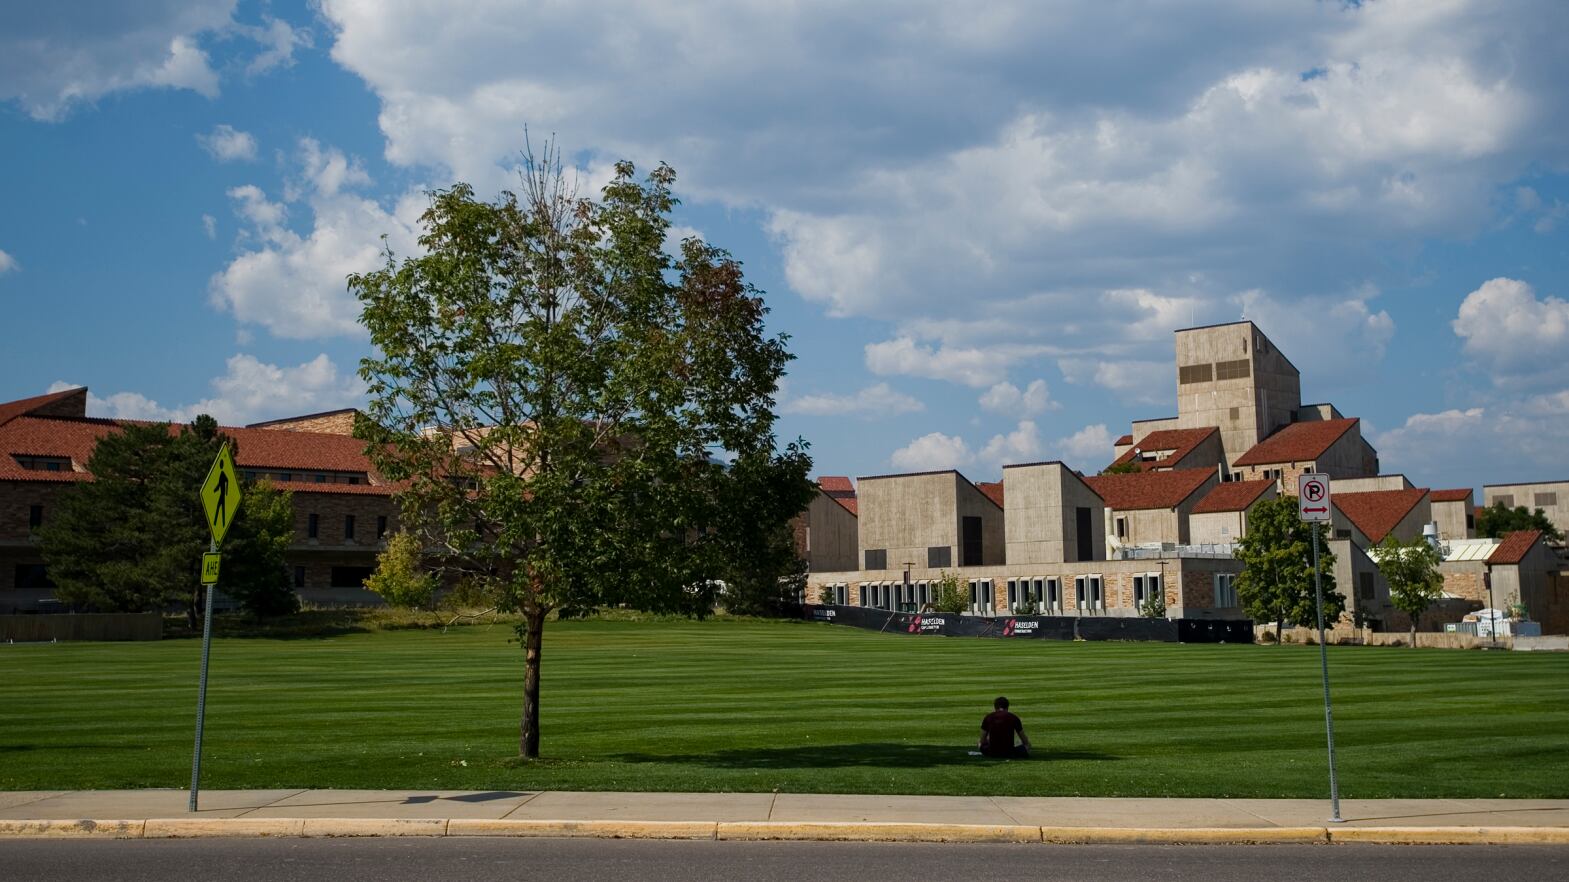 A University of Colorado Boulder student studies in the shade of a tree in front of Business Field with school buildings in the background.